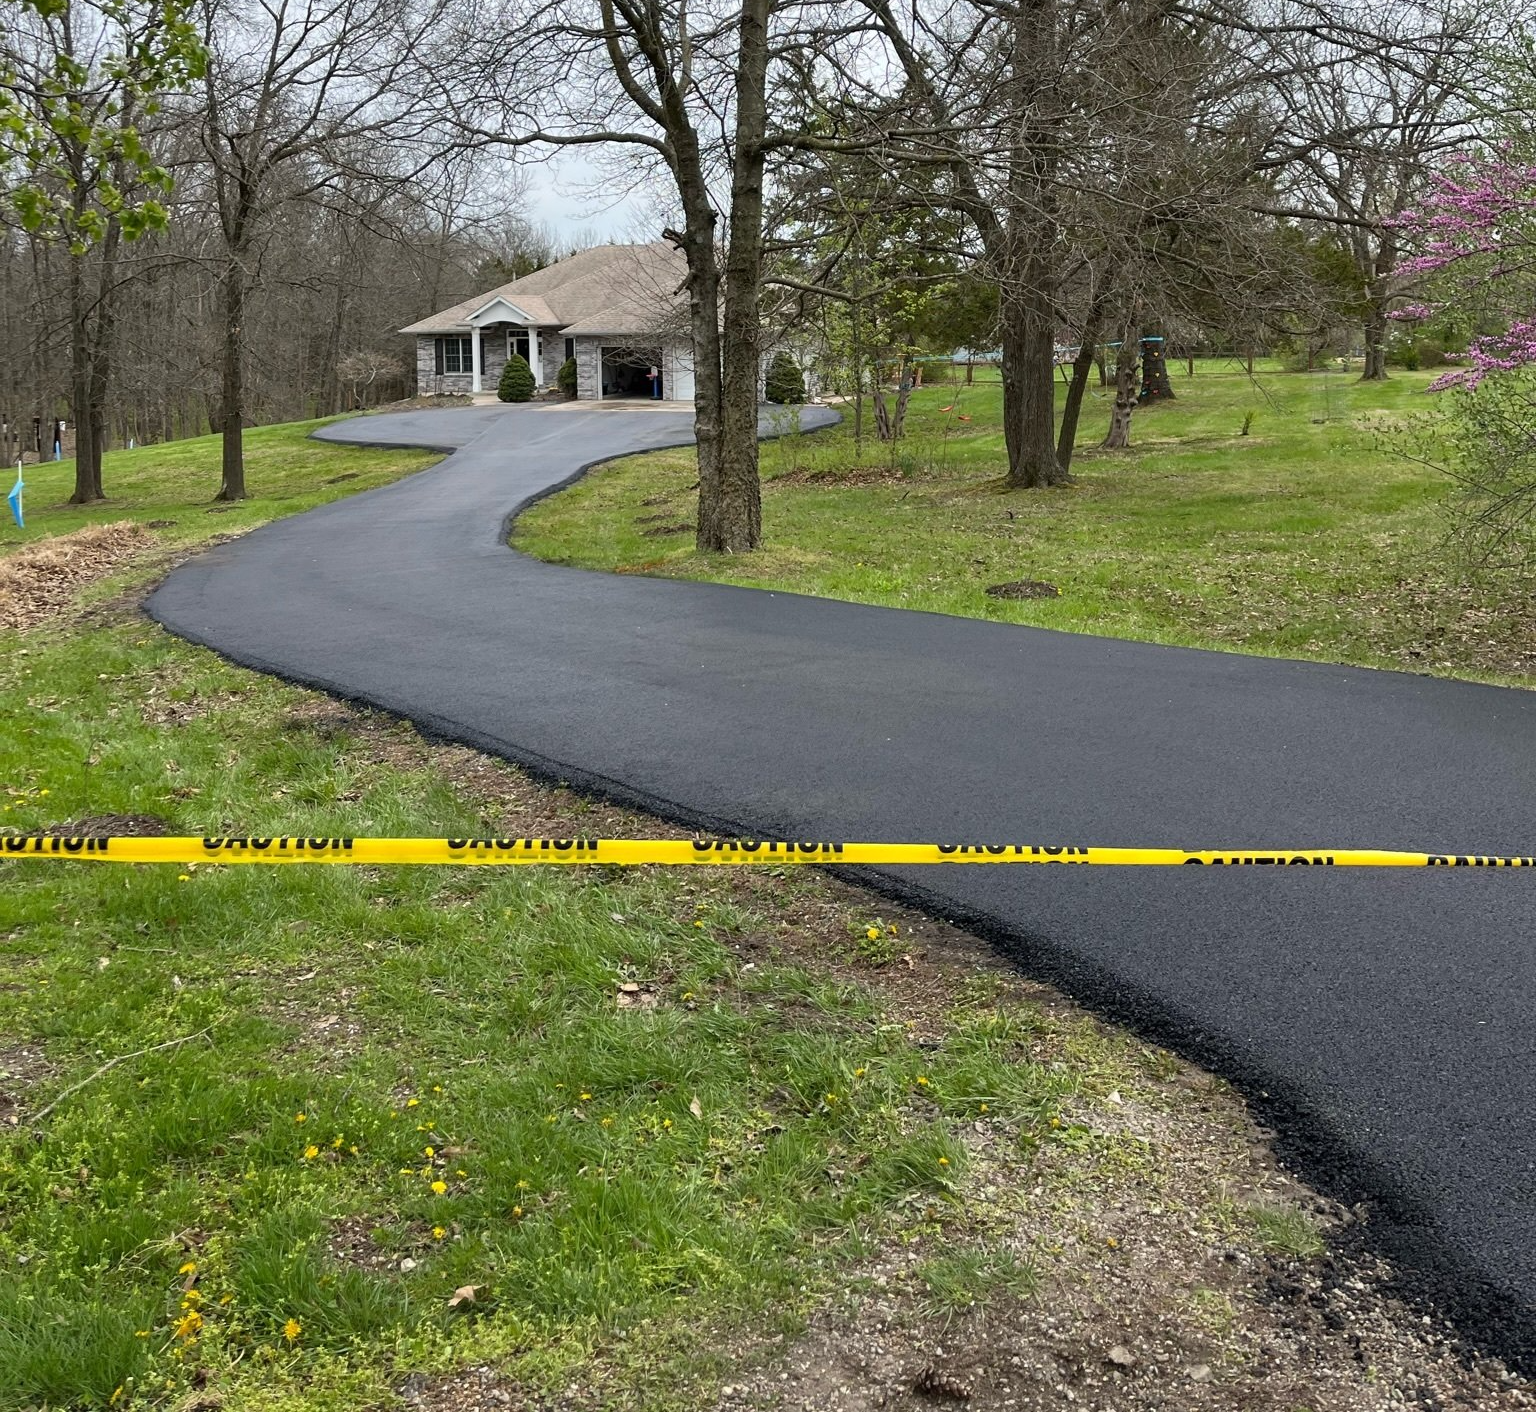 Don’t Let an Ugly Driveway Impact Your Jeff City, MO Home’s Curb Appeal. Get Started With MoSEAL.